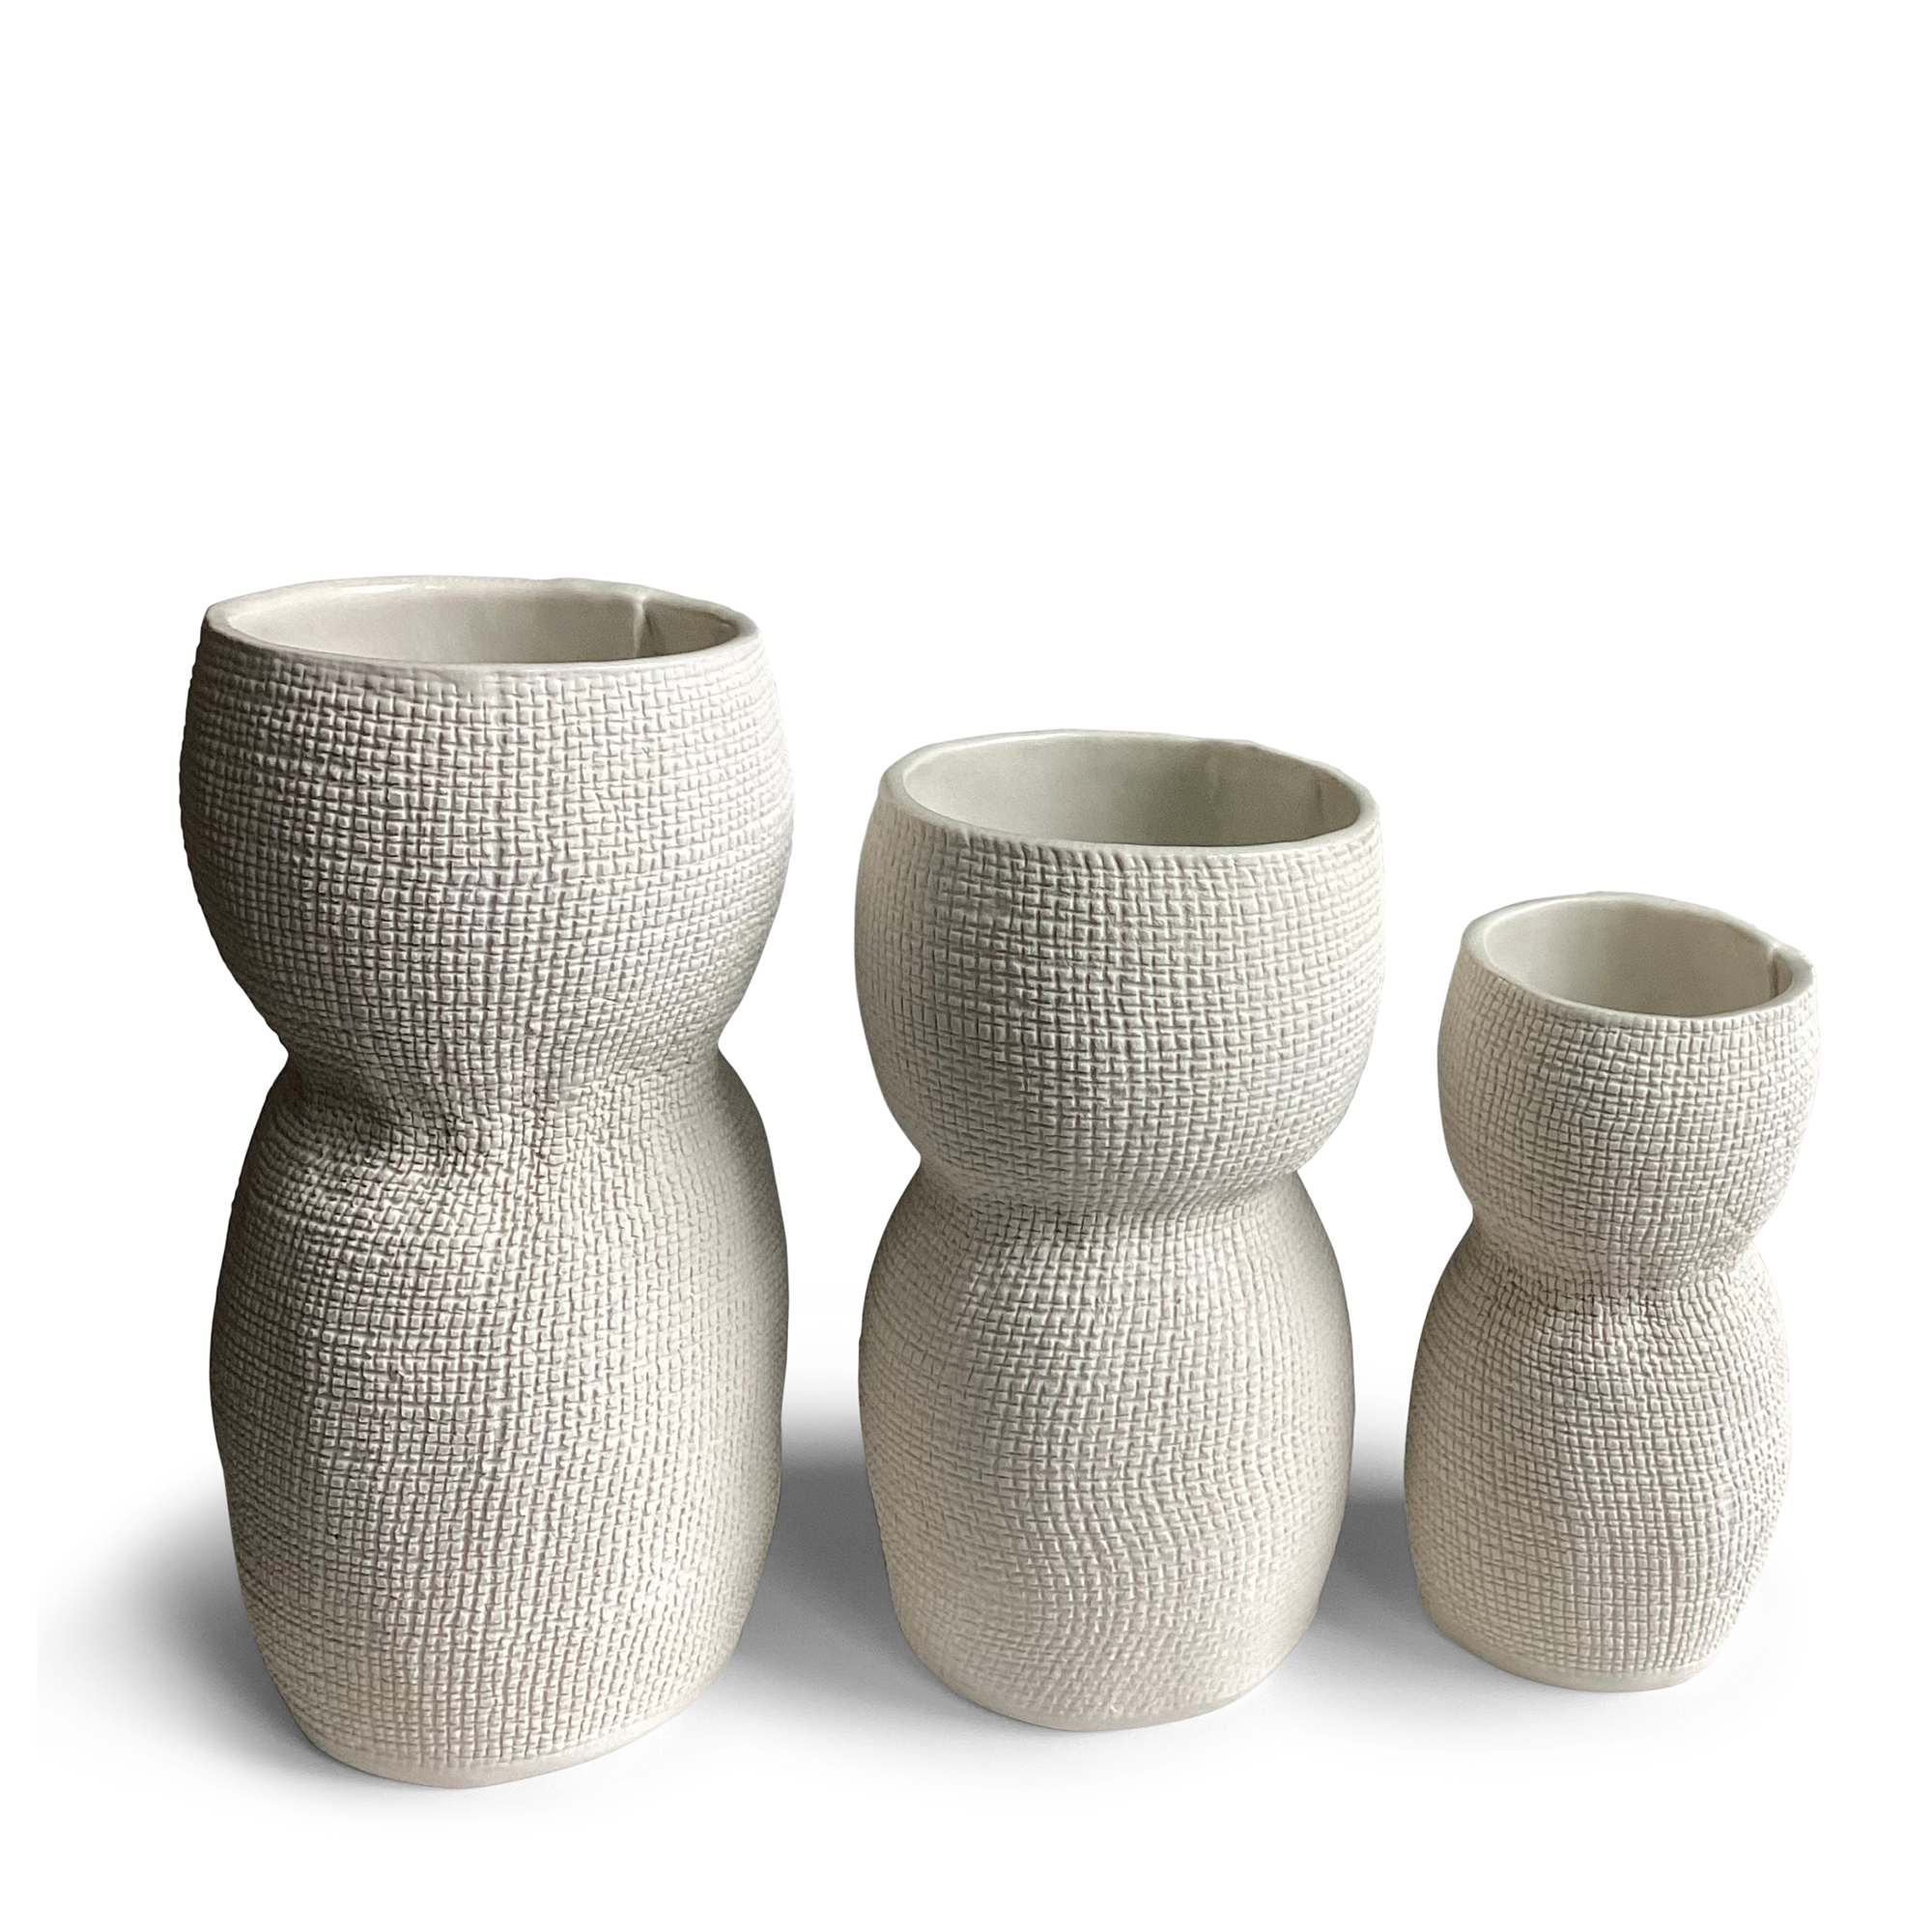 Three textured white vases of varying heights are displayed side by side, each featuring a unique, organic shape. The vases have a woven-like surface pattern that adds visual interest and a tactile feel. Their modern, sculptural design makes them perfect for minimalist or contemporary decor.